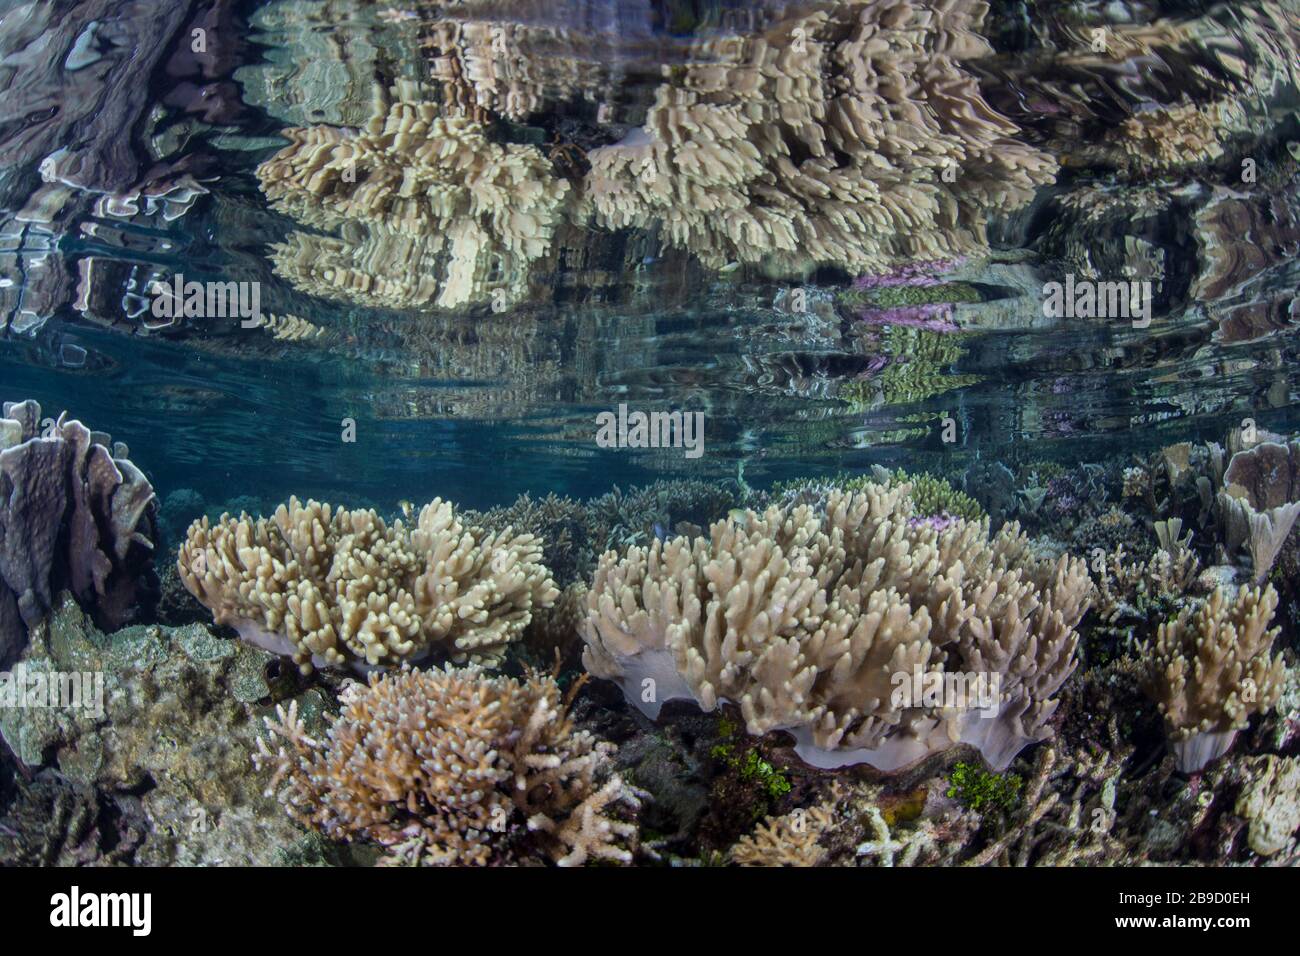 A beautiful coral reef thrives amid the tropical islands of Raja Ampat, Indonesia. Stock Photo